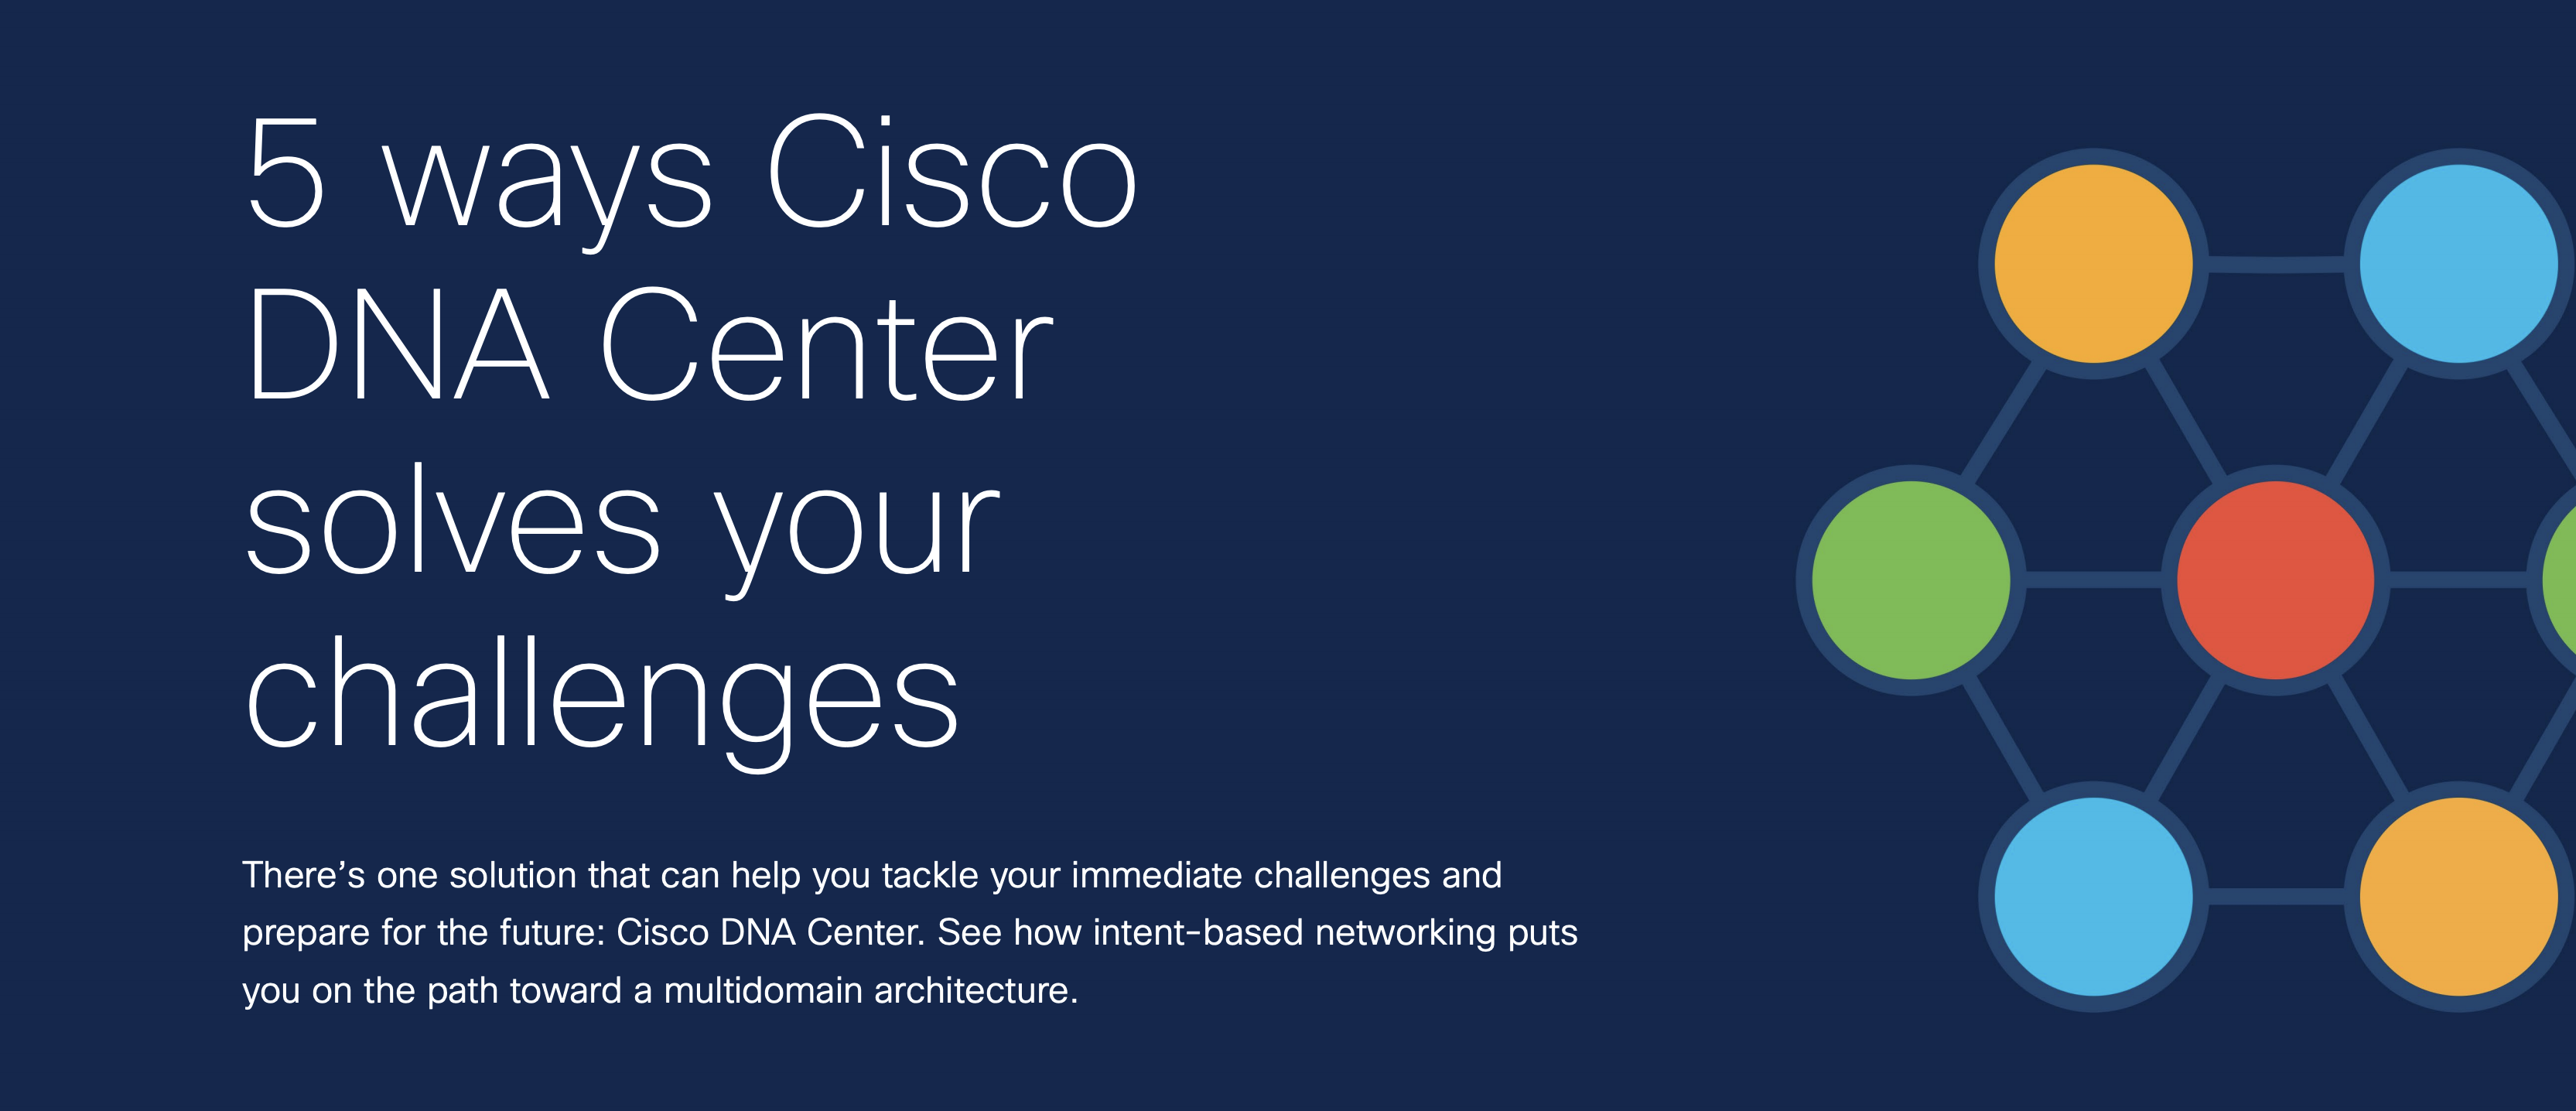 Five ways Cisco DNA Center solves networking challenges, presented in a colorful, informative infographic.